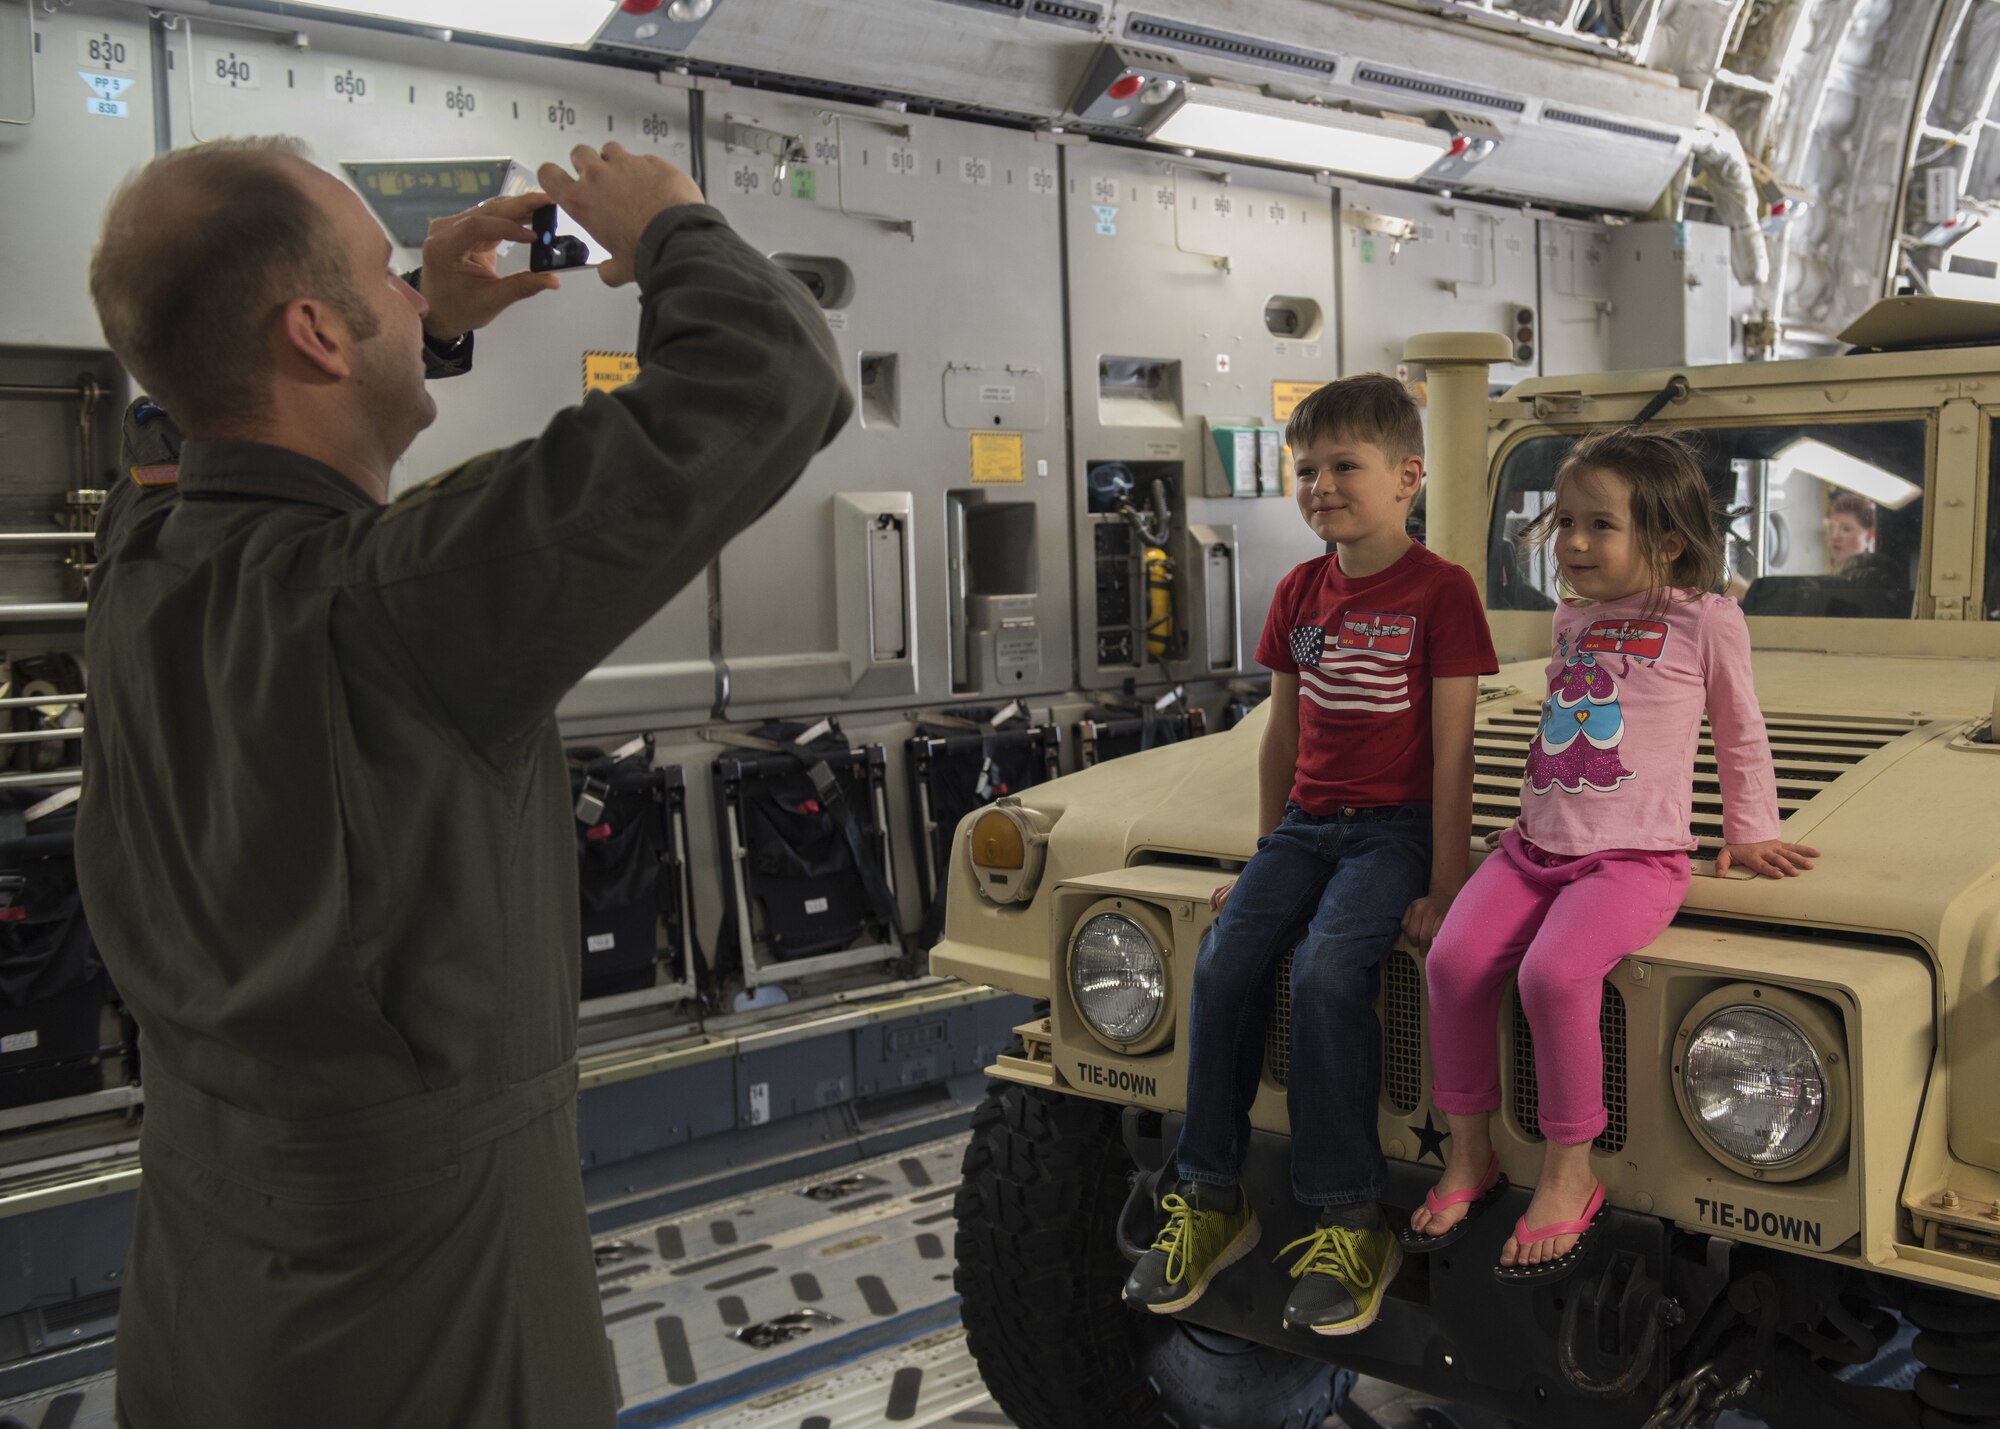 U.S. Air Force Maj. Christopher Schlener, chief of command post assigned to the 58th Airlift Squadron takes a photo of his children sitting on a Humvee inside a C-17 Globemaster III, April 26, 2018, at Altus Air Force Base, Okla.